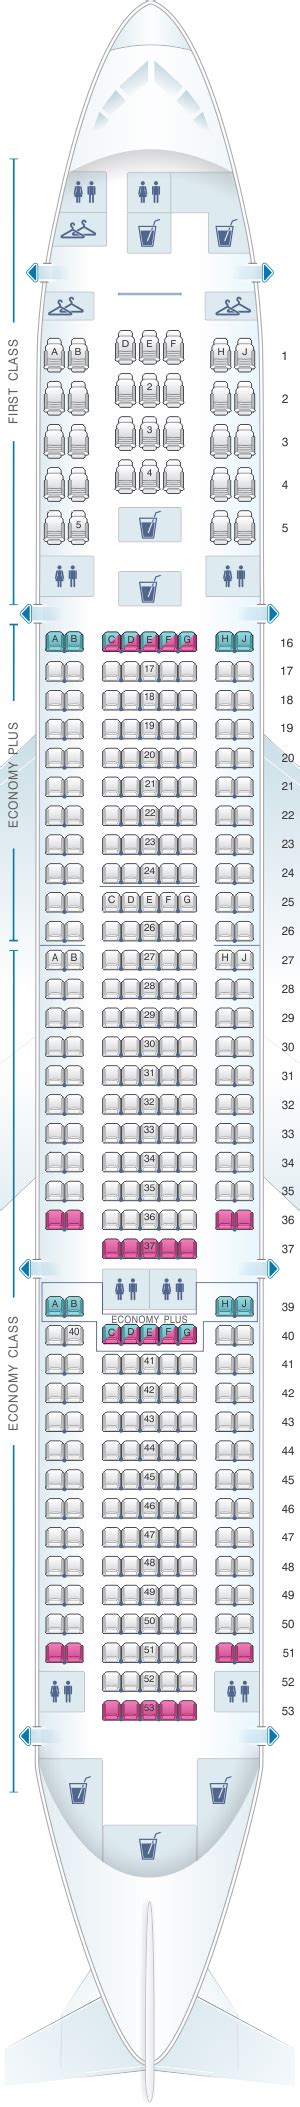 Boeing 777 united seat map. For your next United flight, use this seating chart to get the most comfortable seats, legroom, and recline on . Seat Maps; Airlines; Cheap Flights; Comparison Charts ... Boeing 777-200 (772) Layout 3; Boeing 777-200 (772) Layout 4; Boeing 777-200 (772) Layout 5; Boeing 777-300ER (77W) Boeing 787-10 (781) 